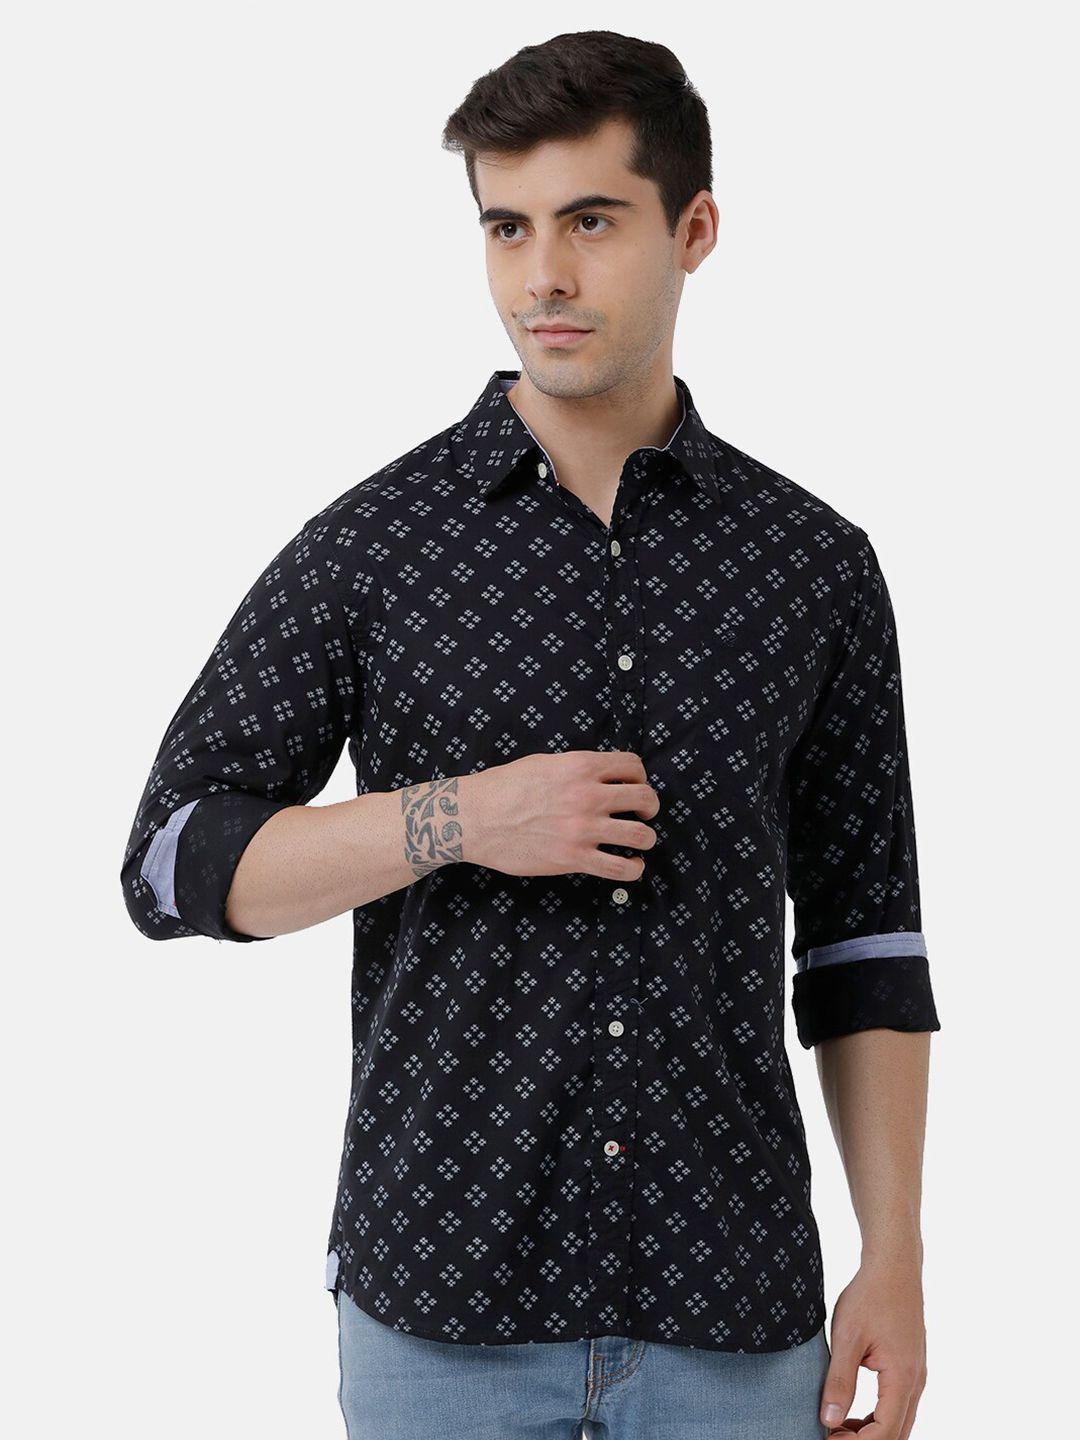 double-two-men-black-slim-fit-printed-india-slim-cotton-casual-shirt